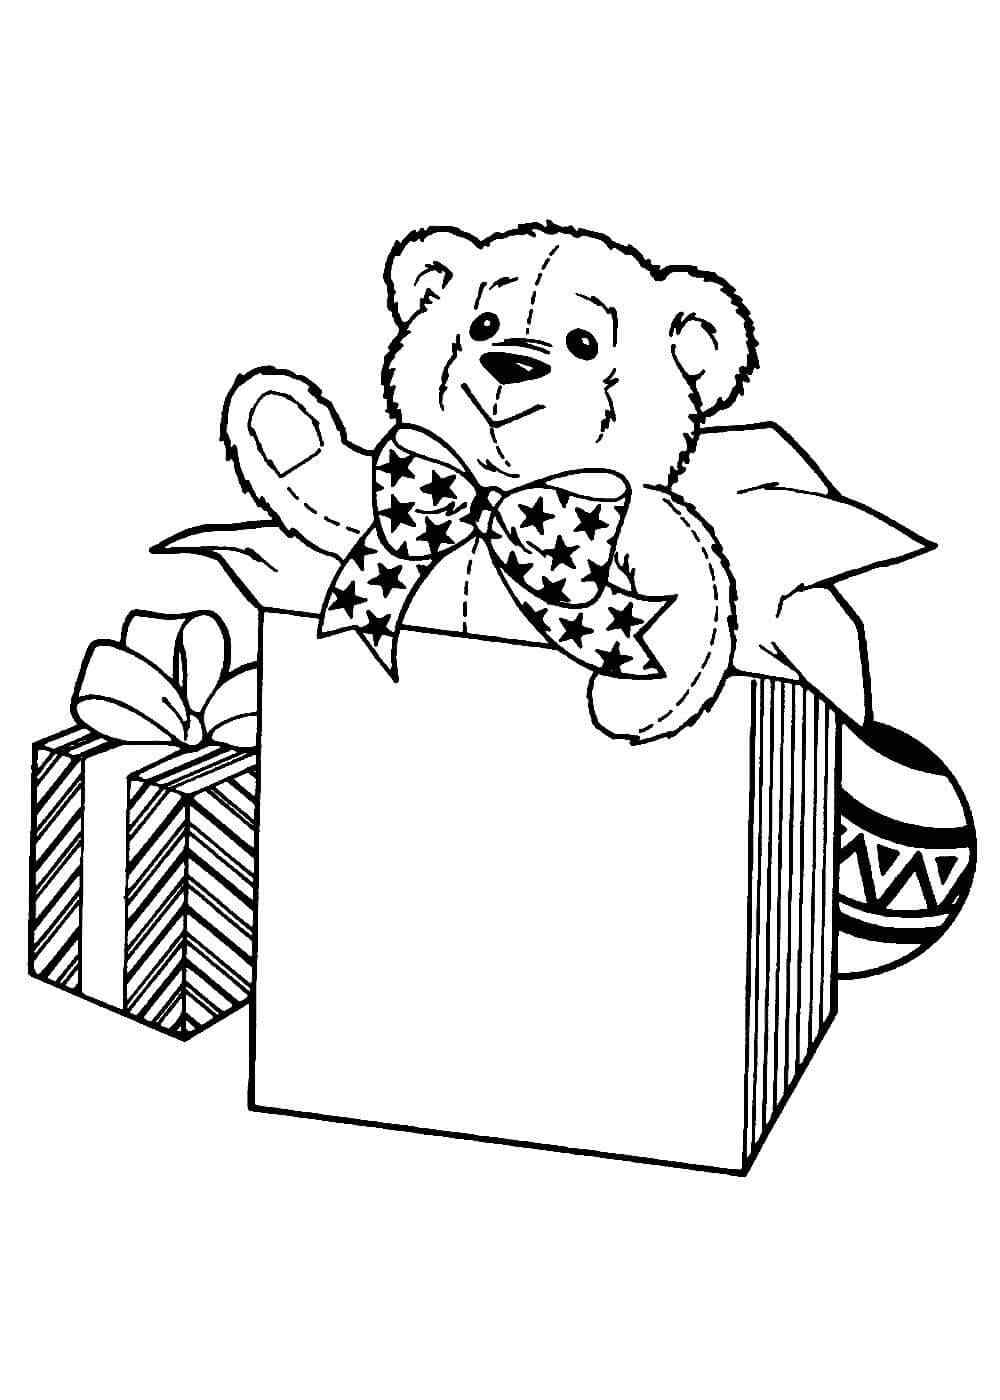 Toy Bear As A Gift Coloring Page